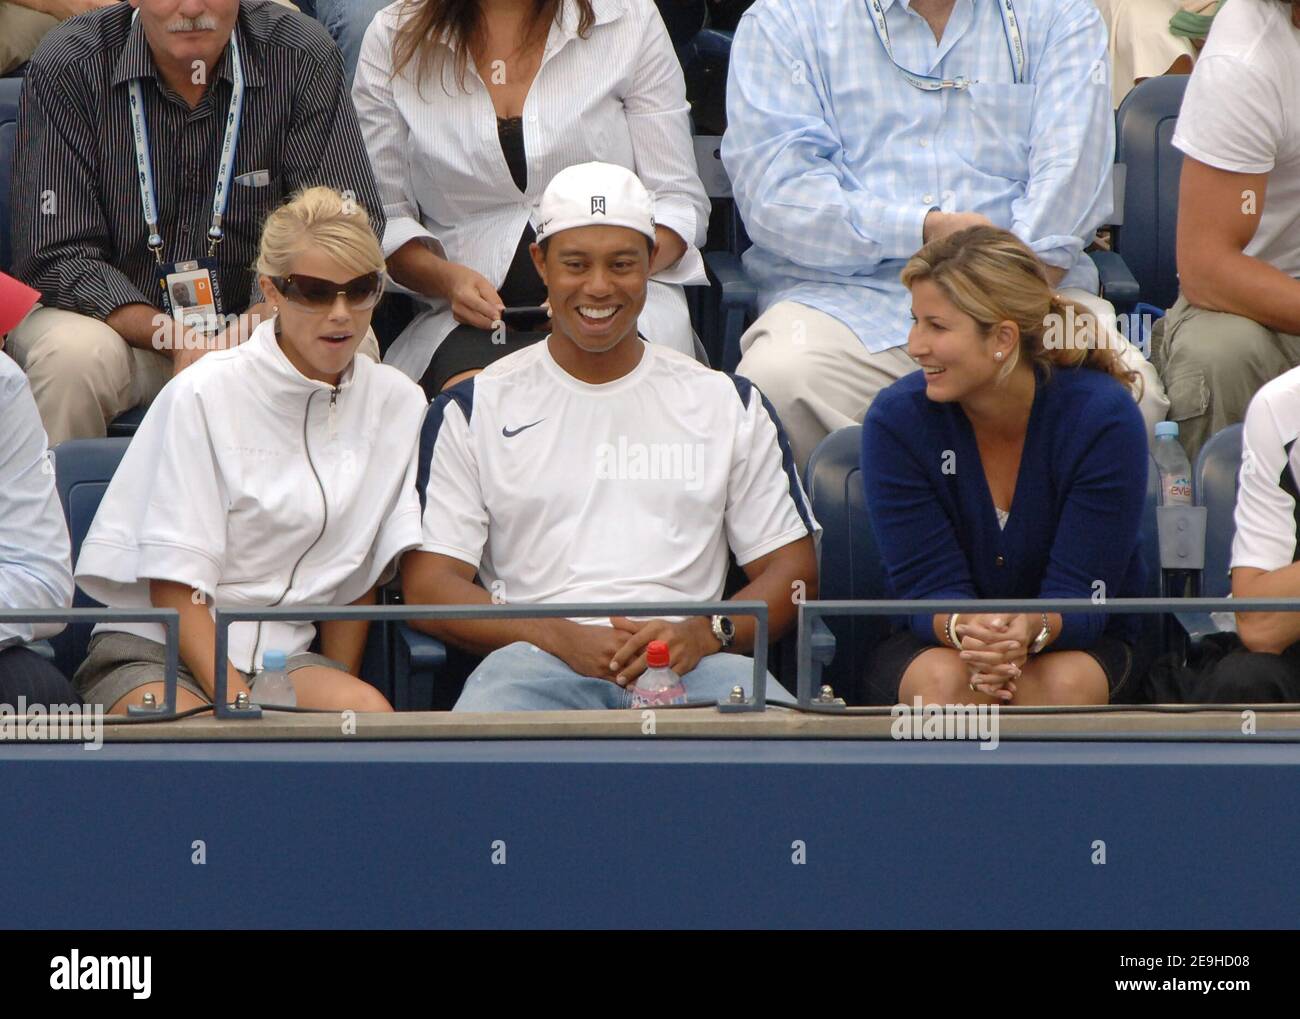 Tiger Woods and his wife Elin Nordegren with Roger Federer 's girlfriend Mirka Vavrinec watch Switzerland's Roger Federer defeating USA's Andy Roddick, 6-2, 4-6, 7-5, 6-1, in the Men's final of the 2006 US Open at the USTA Billie Jean King National Tennis Center in Flushing Meadows, in New York City, NY, USA, on September 10, 2006. Photo by Lionel Hahn/Cameleon/ABACAPRESS.COM Stock Photo